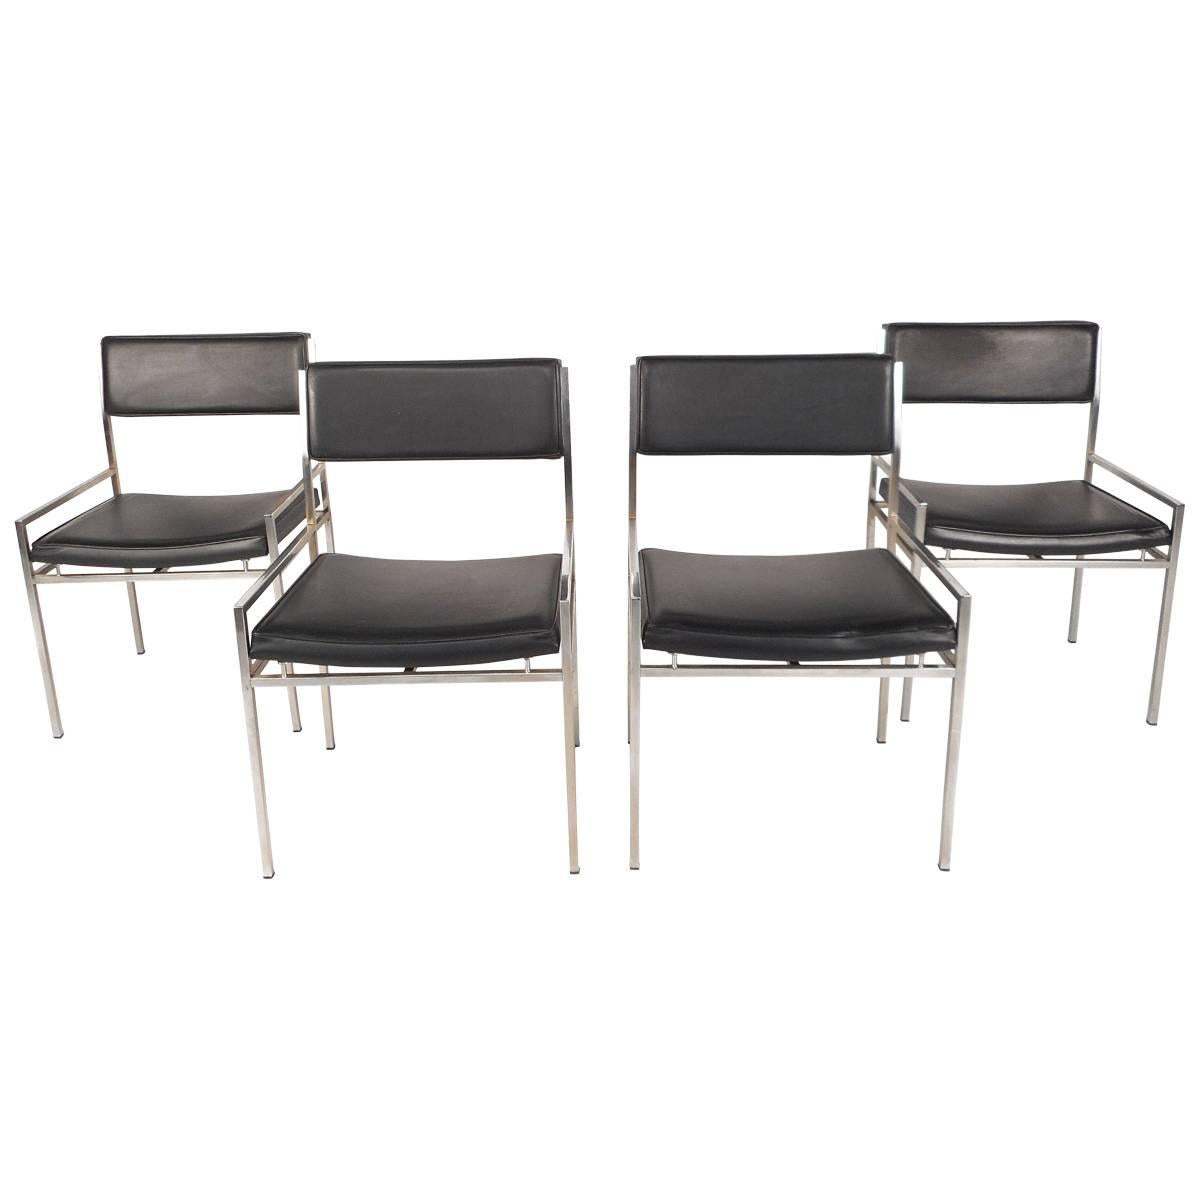 Set of Mid-Century Modern Chrome and Vinyl Dining Chairs